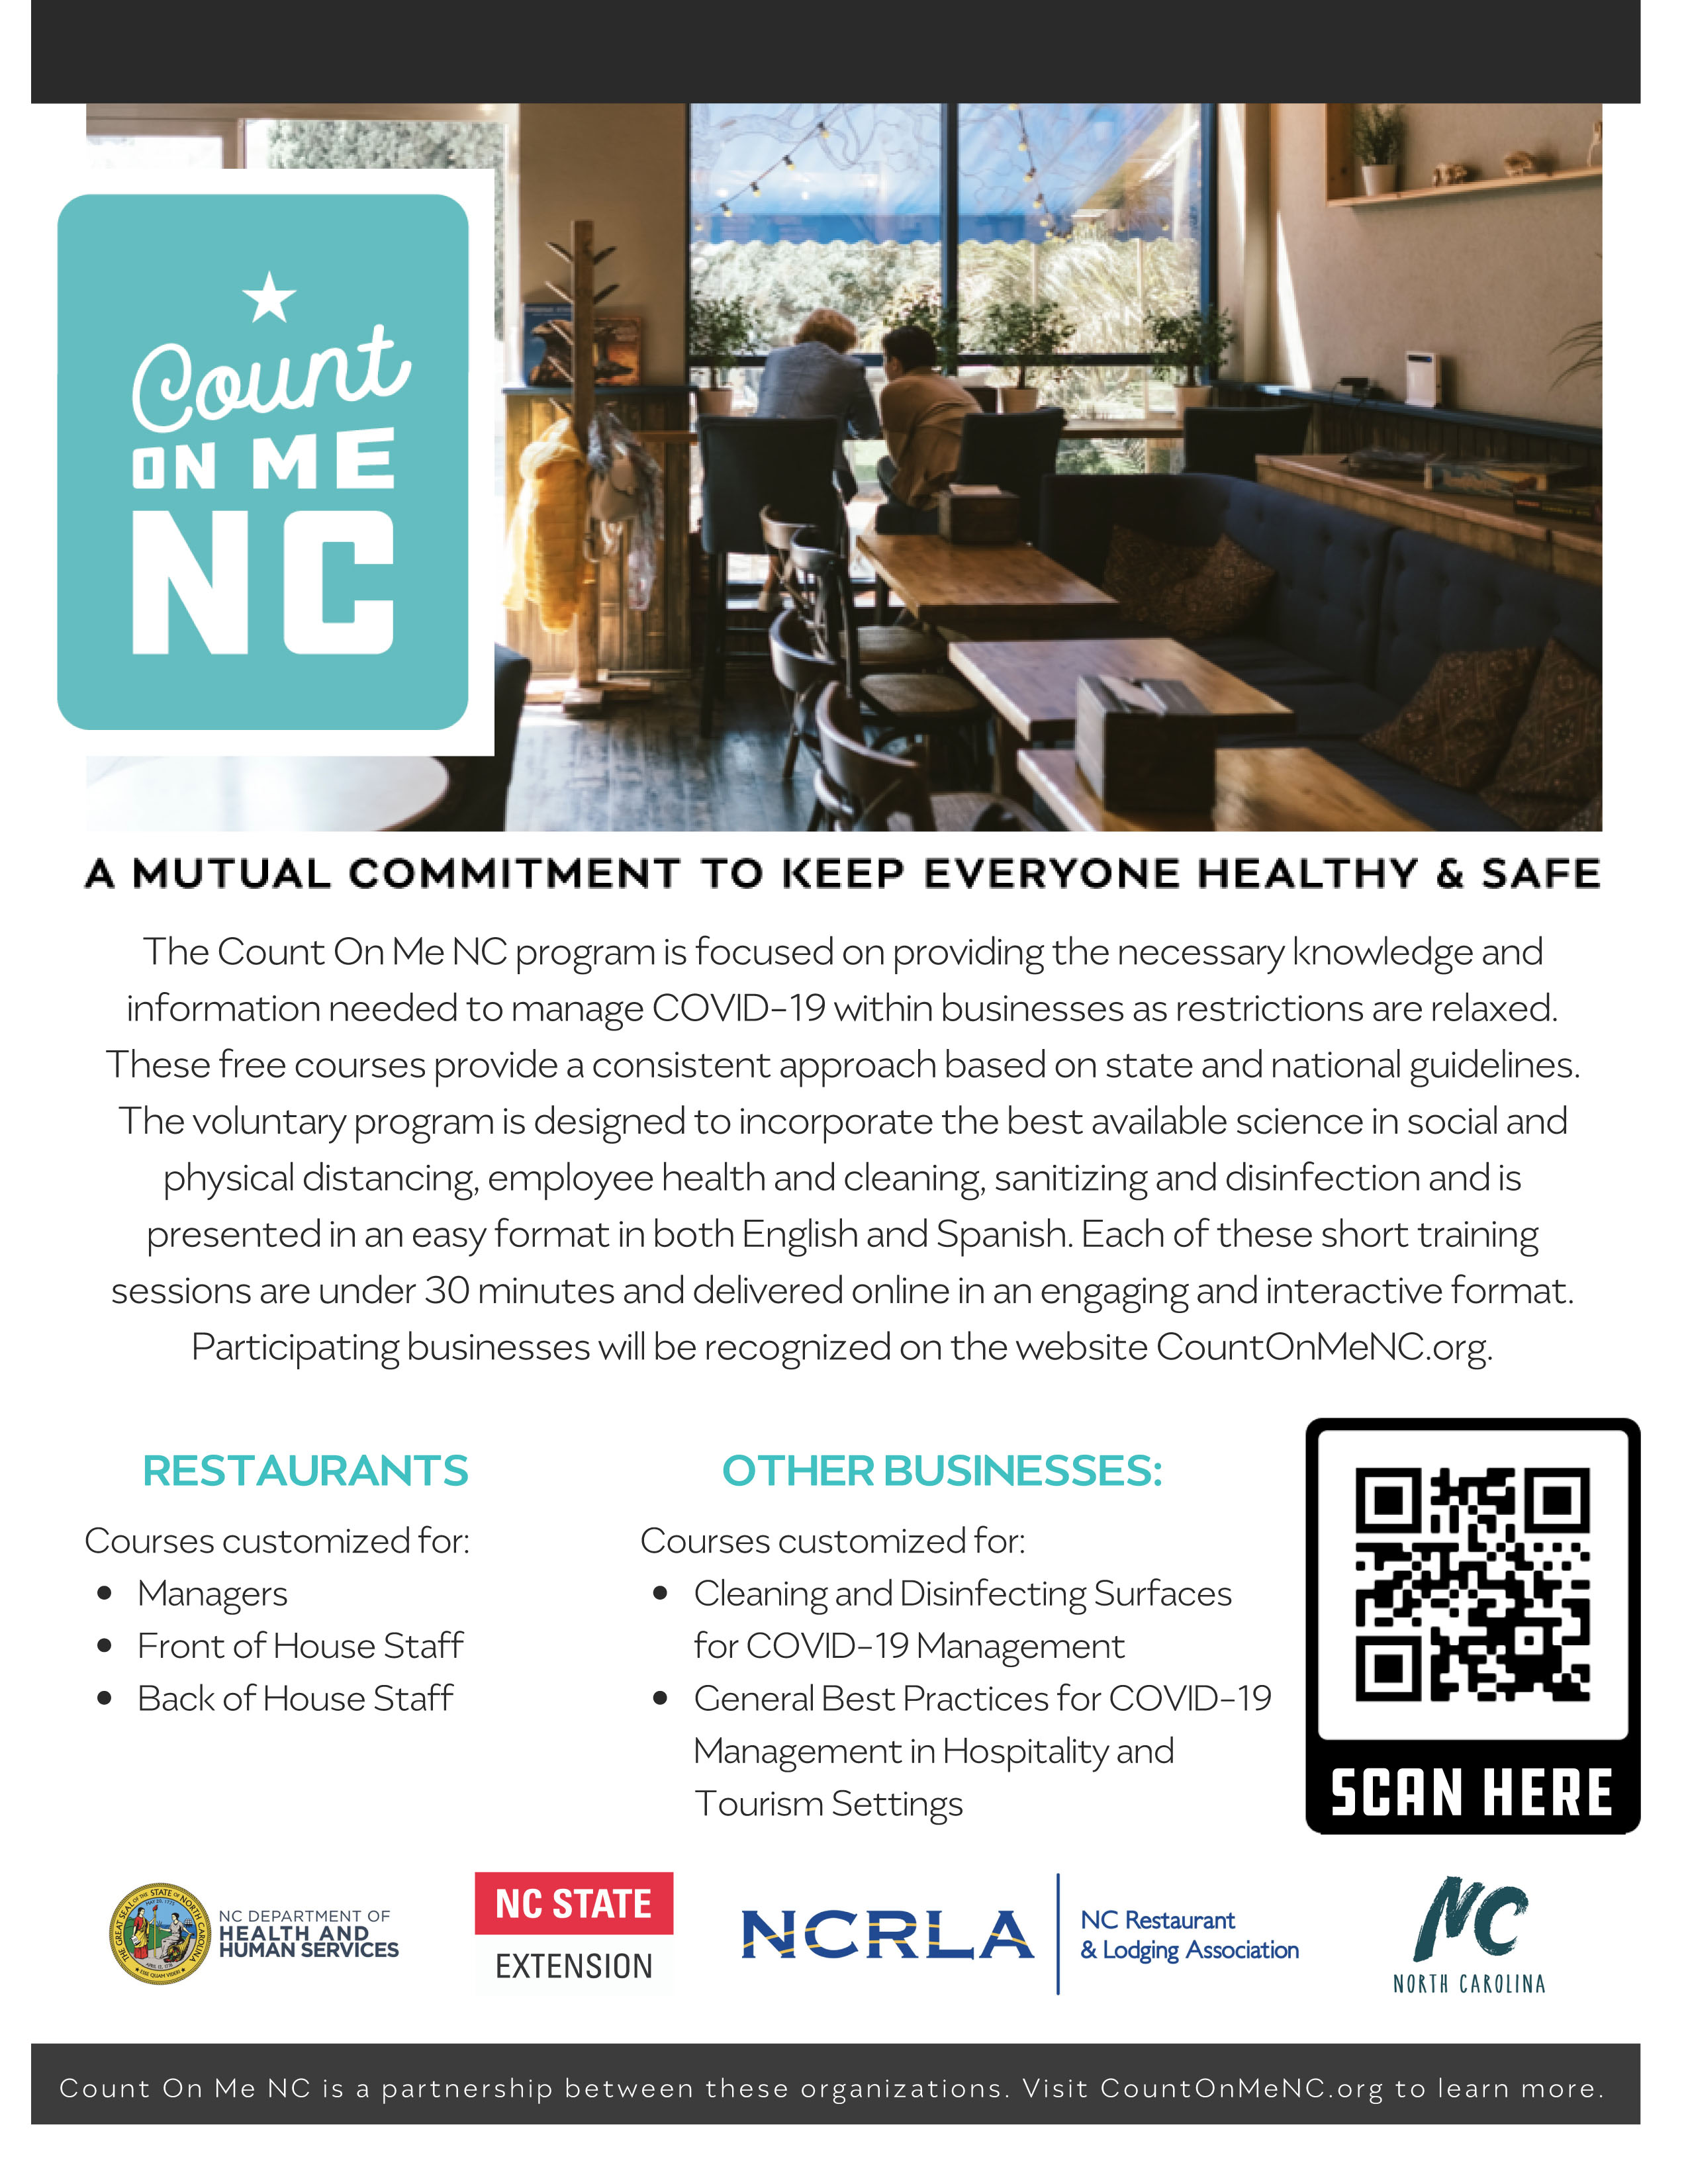 Count on me NC Flyers